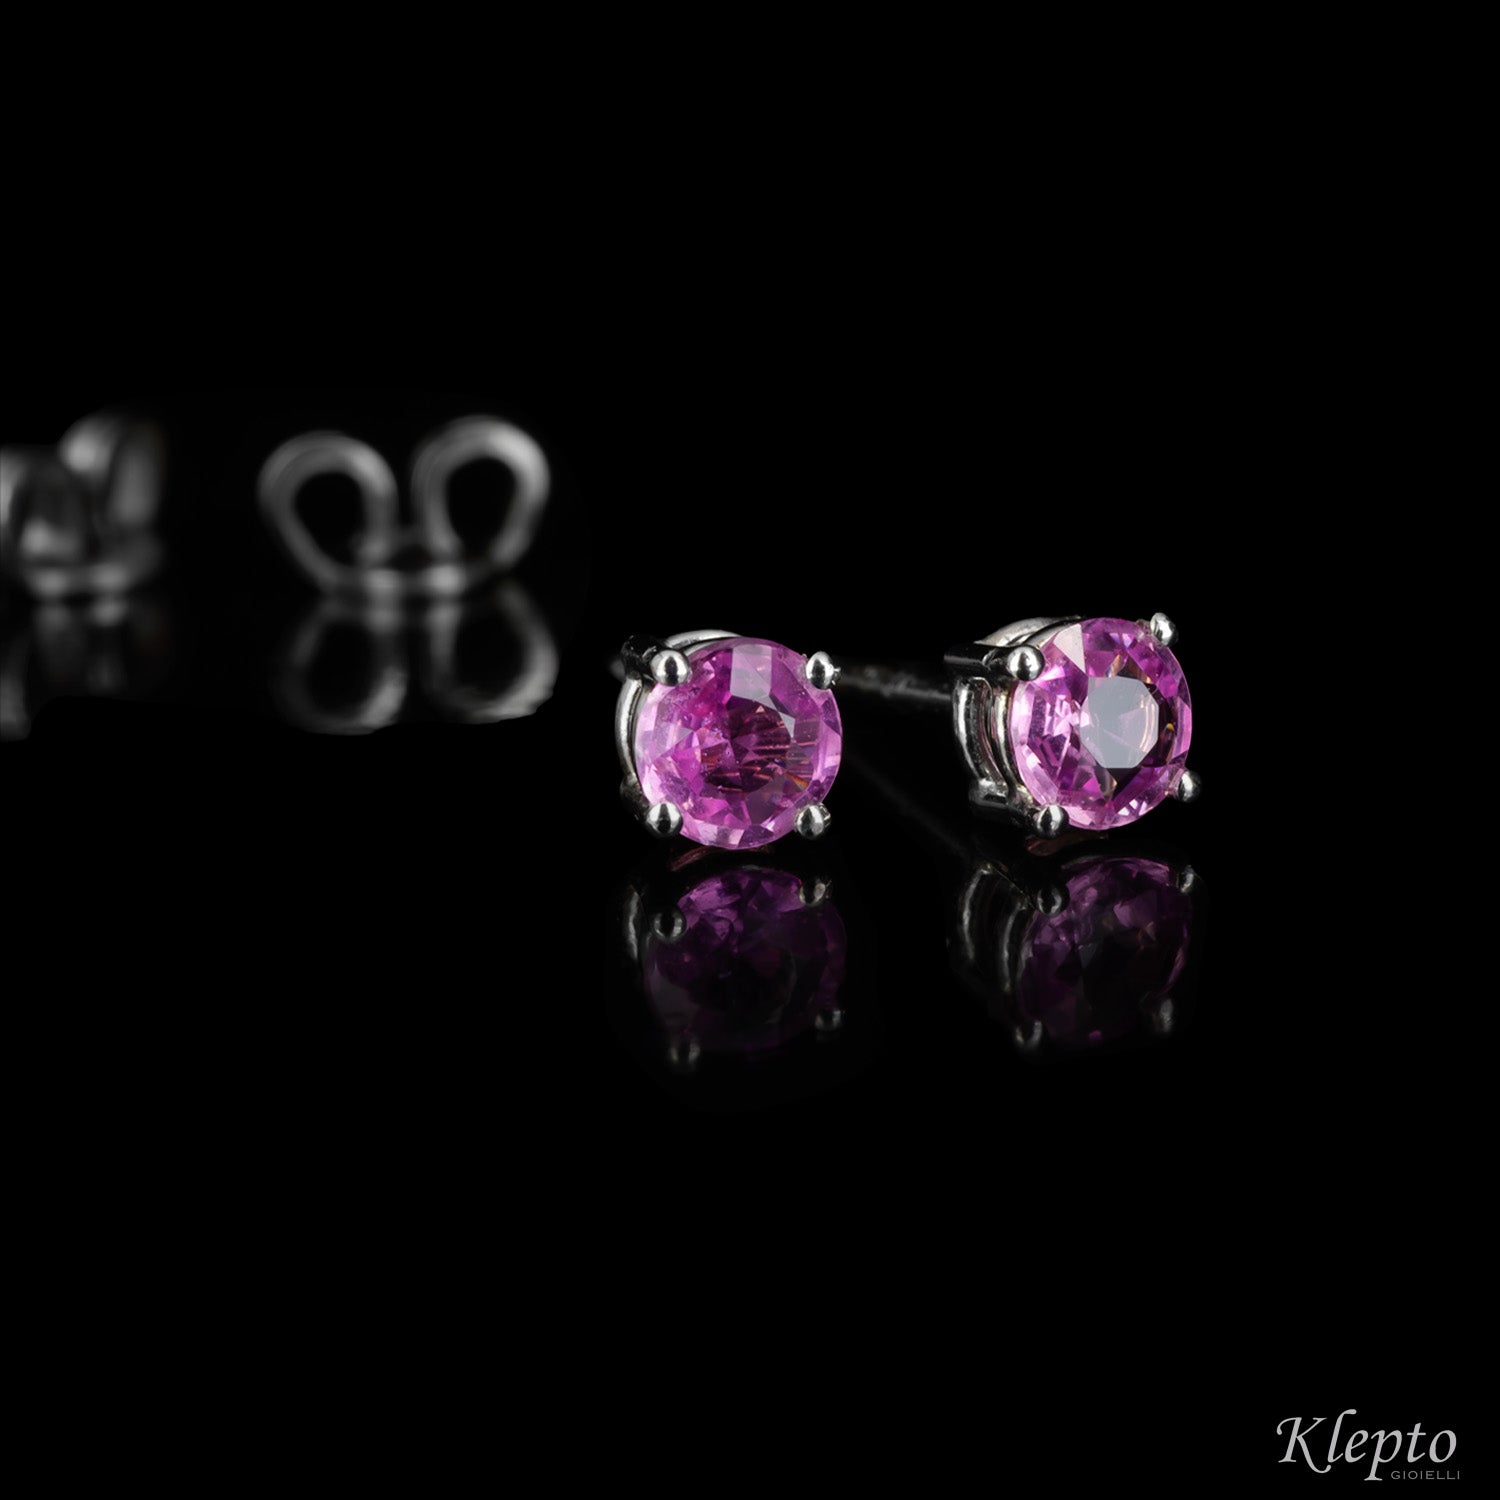 White gold earrings with pink sapphires